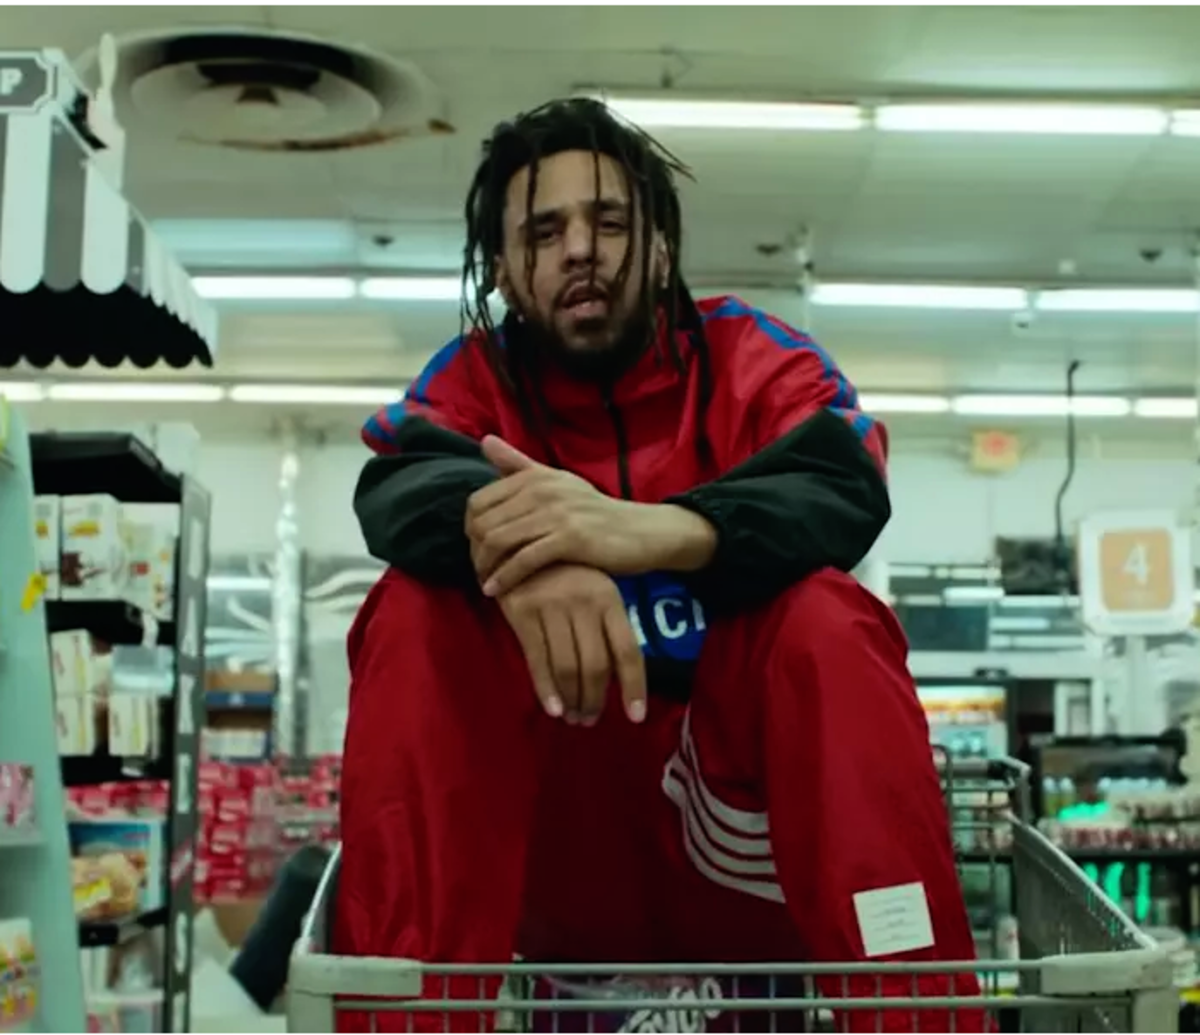 J. Cole a Hip Hop Trailblazer - From Fayetteville to the Top